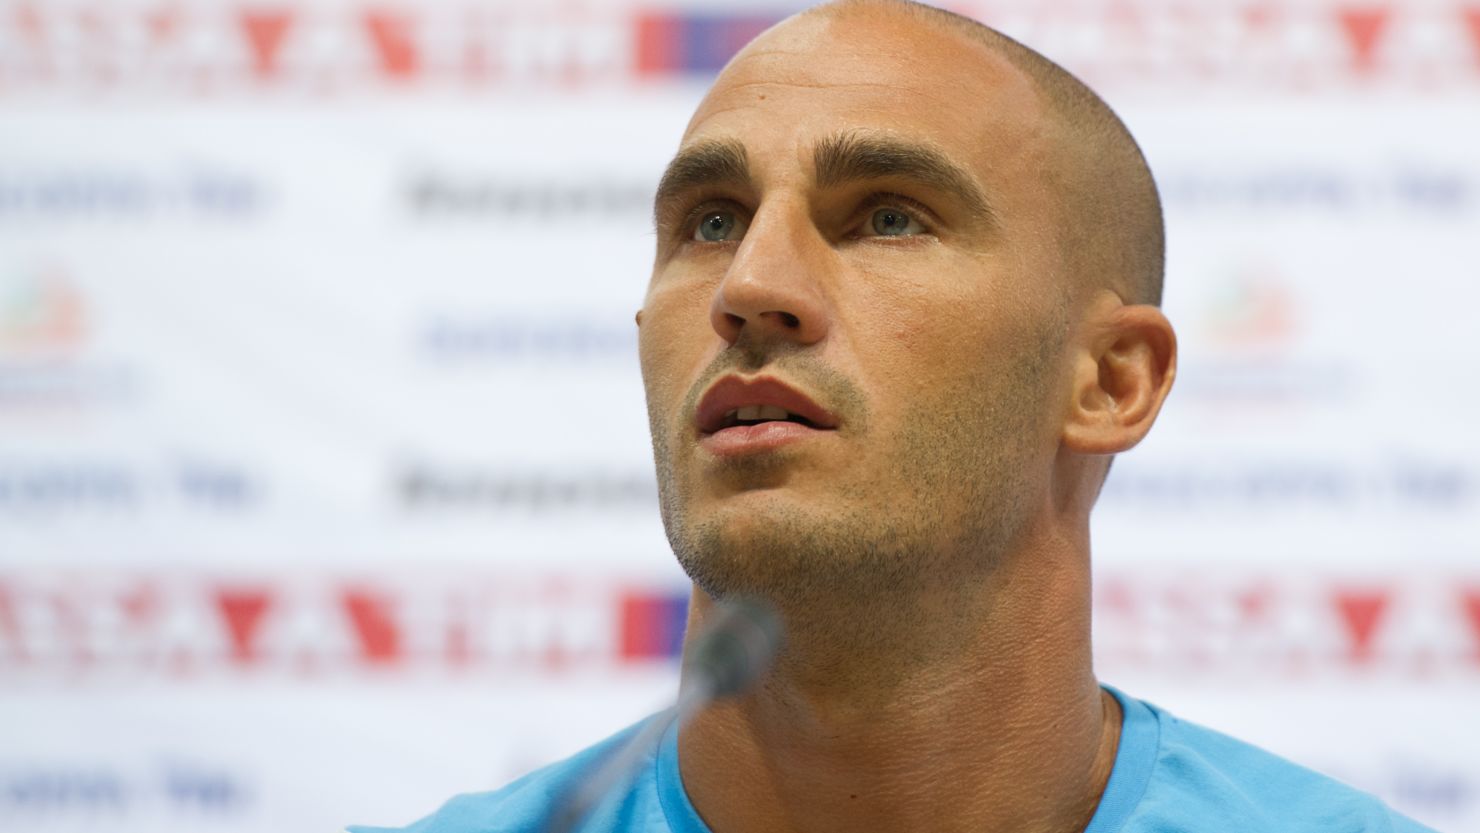 Napoli defender Paolo Cannavaro has been accused of failing to report an approach made to him about match-fixing